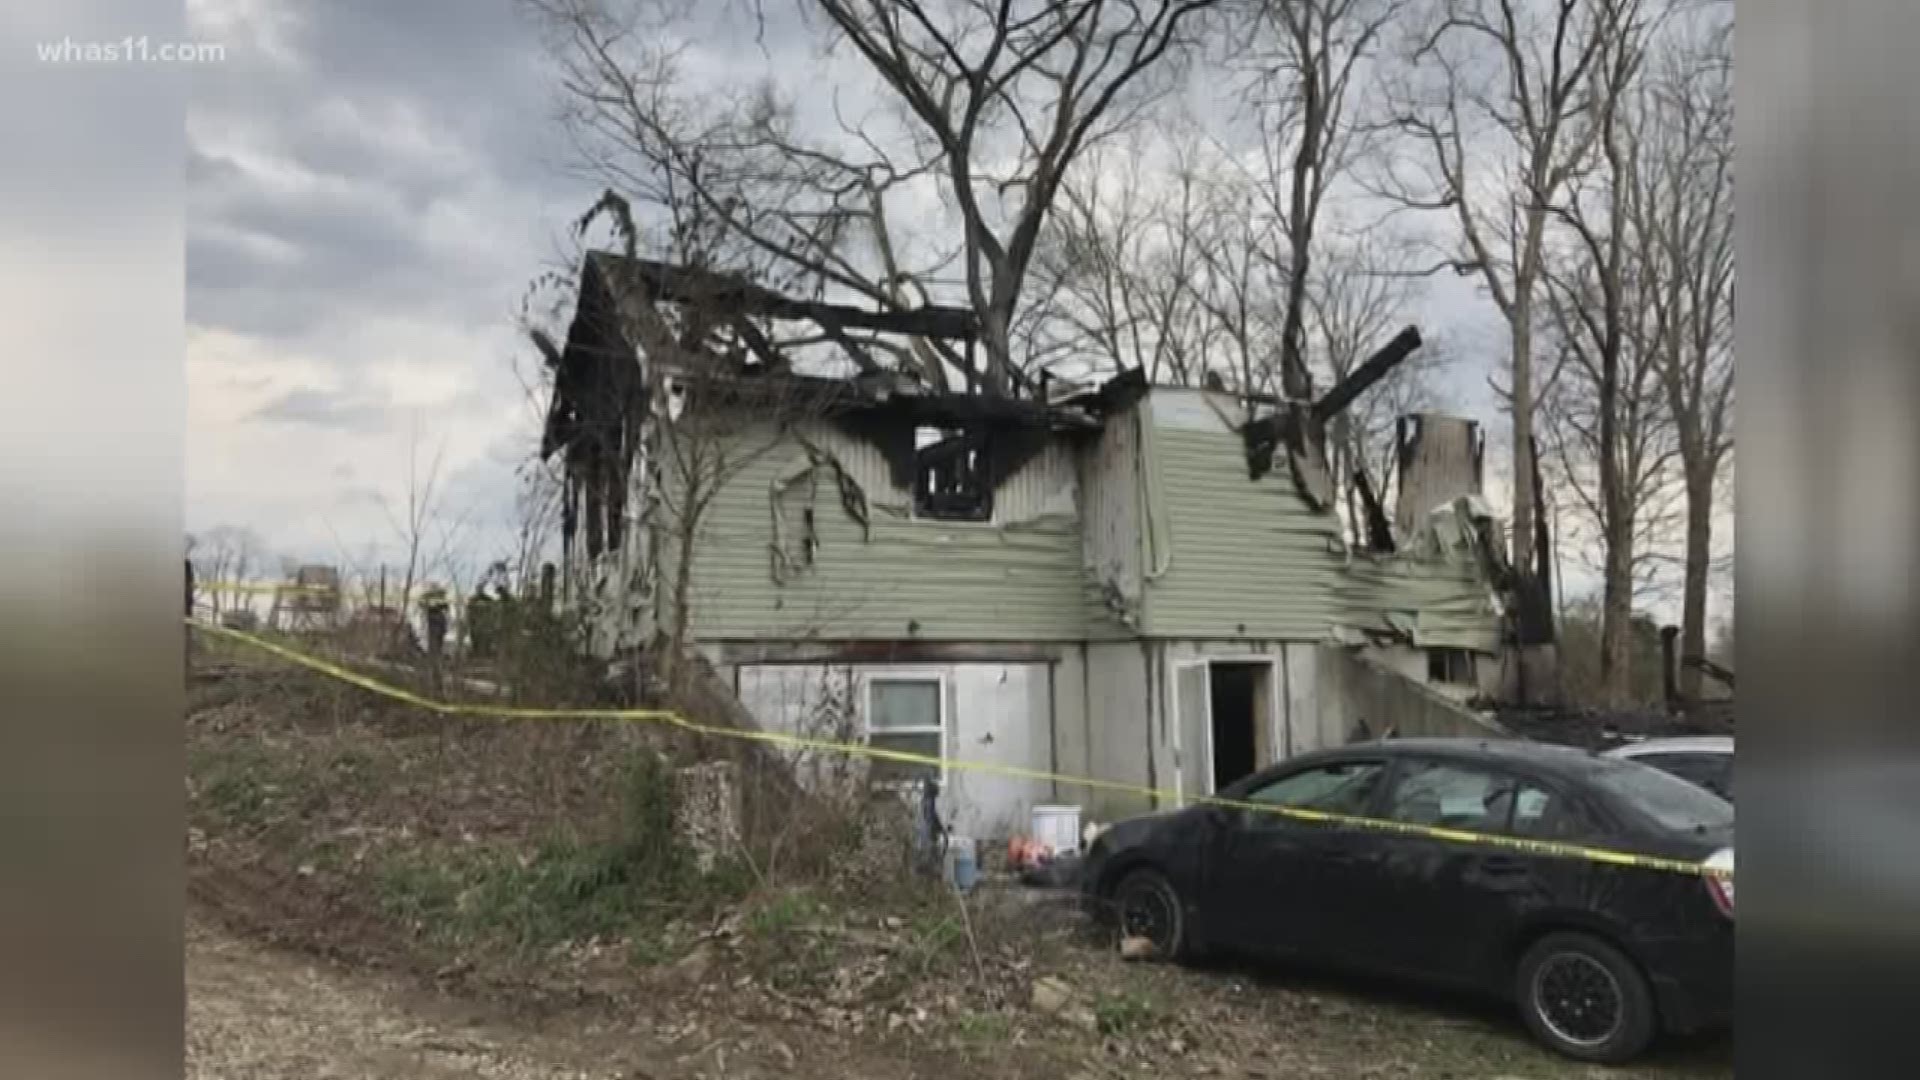 Fire officials say six people are dead following a house fire in Switzerland County, Indiana.